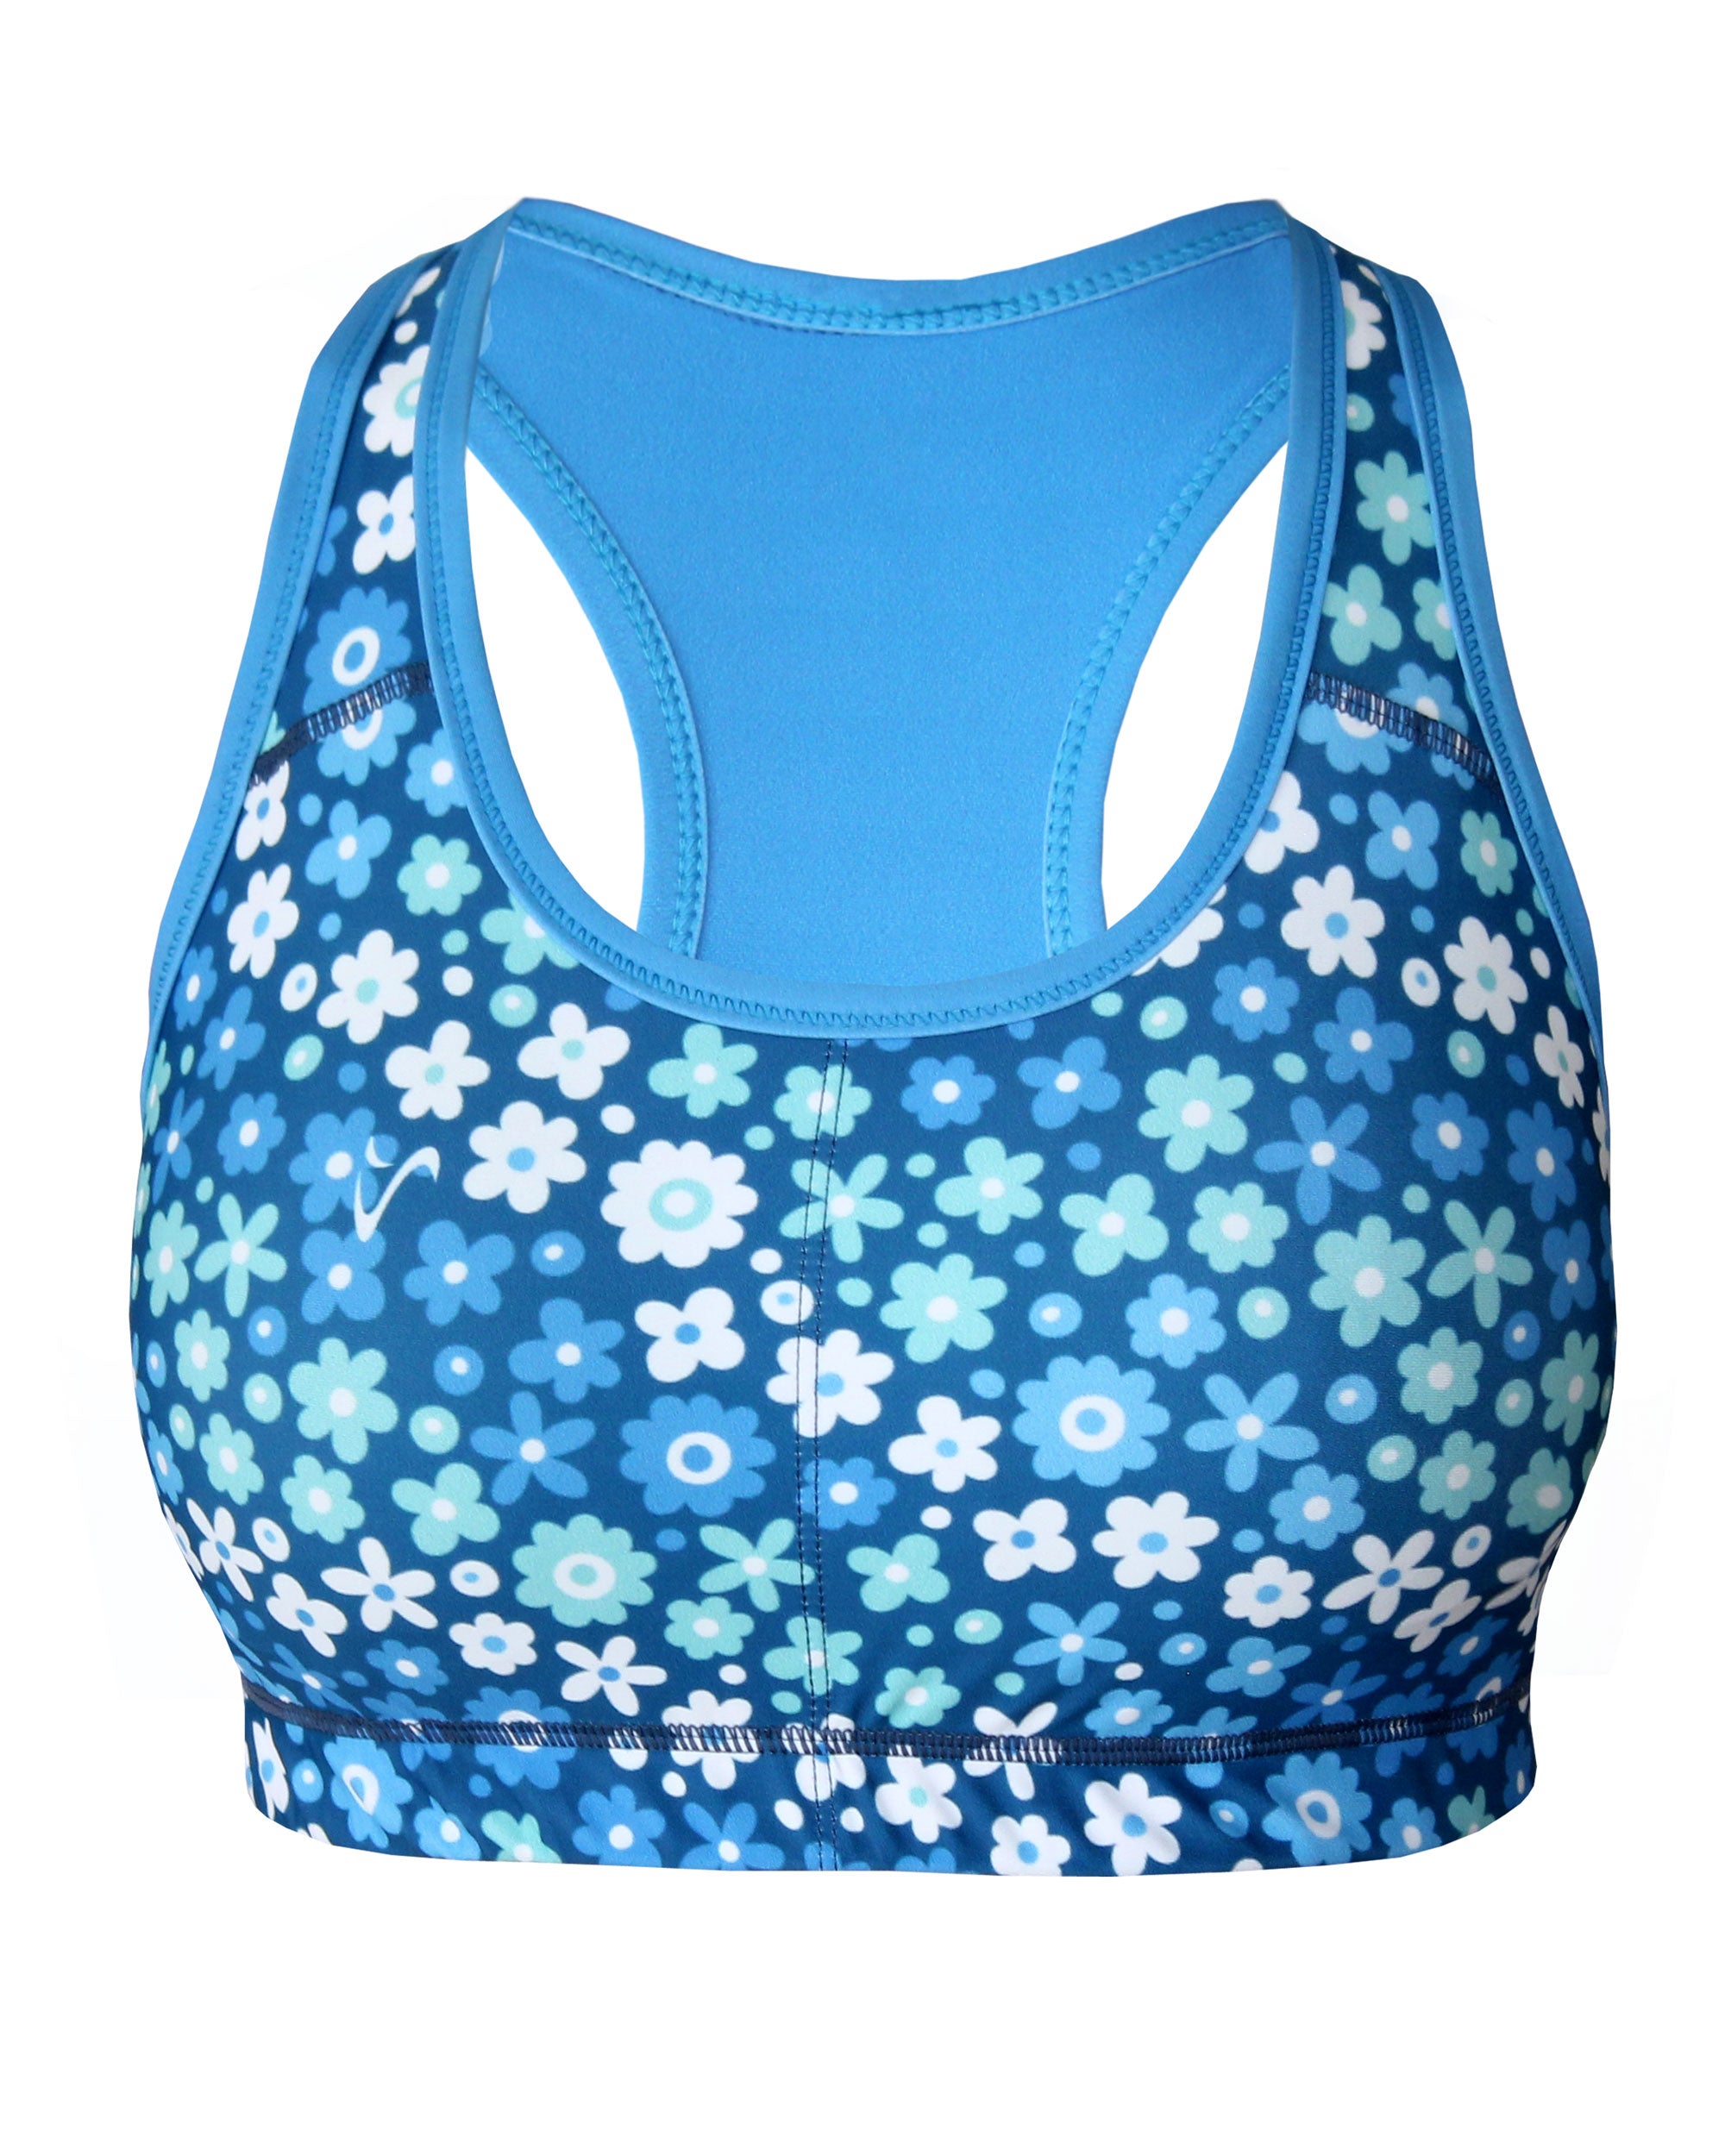 High intensity sports bra, made in Cape Town, South Africa.